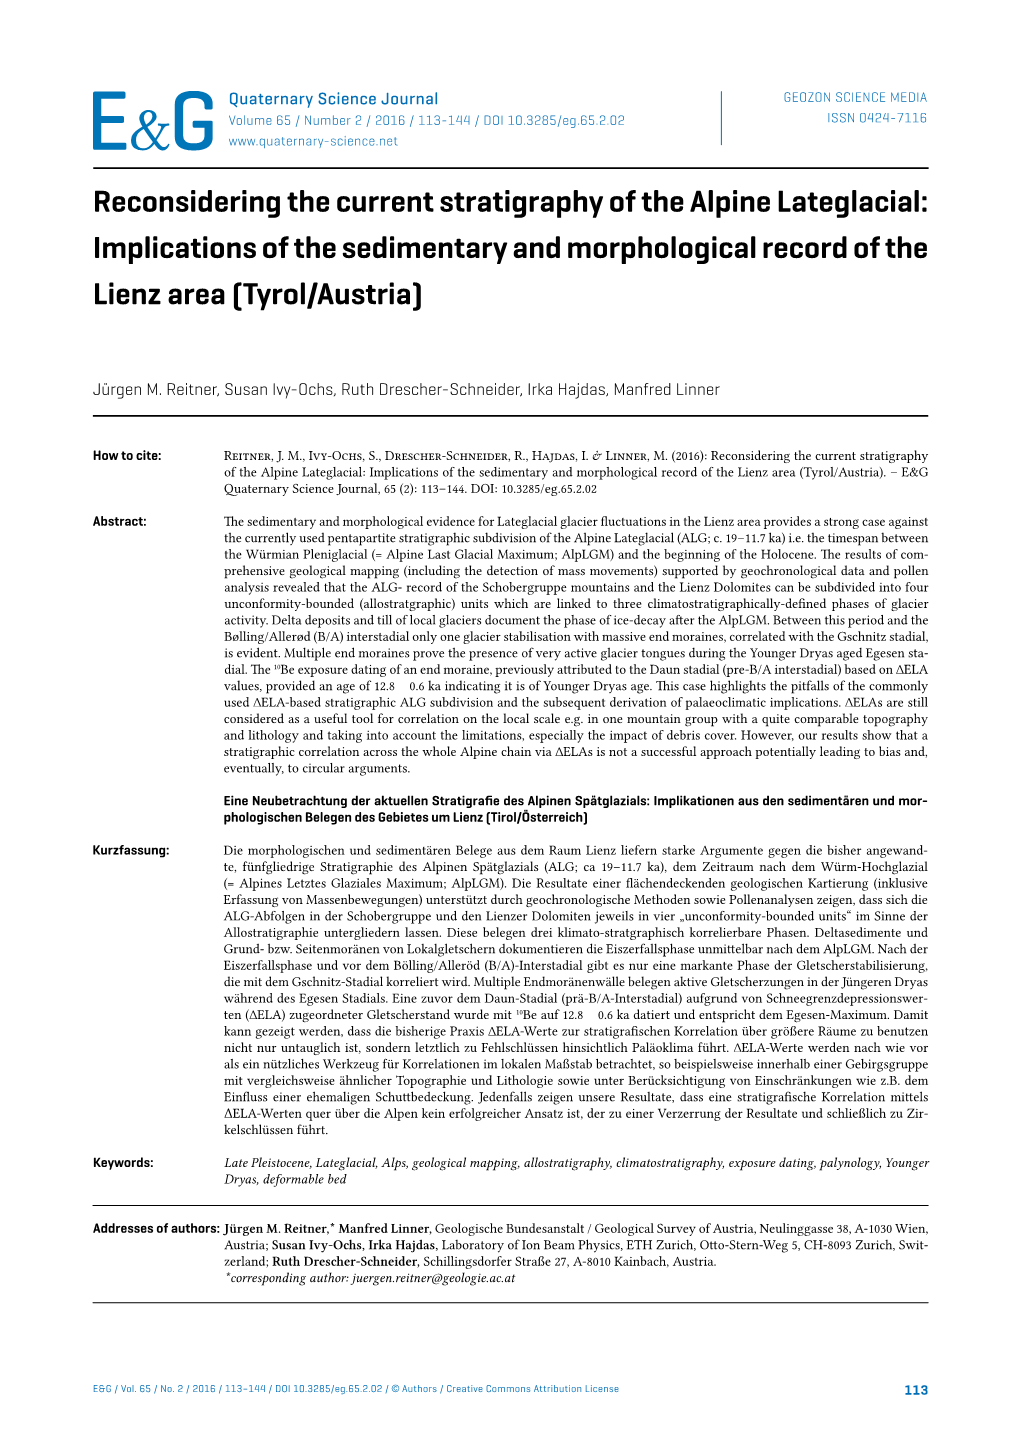 Reconsidering the Current Stratigraphy of the Alpine Lateglacial: Implications of the Sedimentary and Morphological Record of the Lienz Area (Tyrol/Austria)